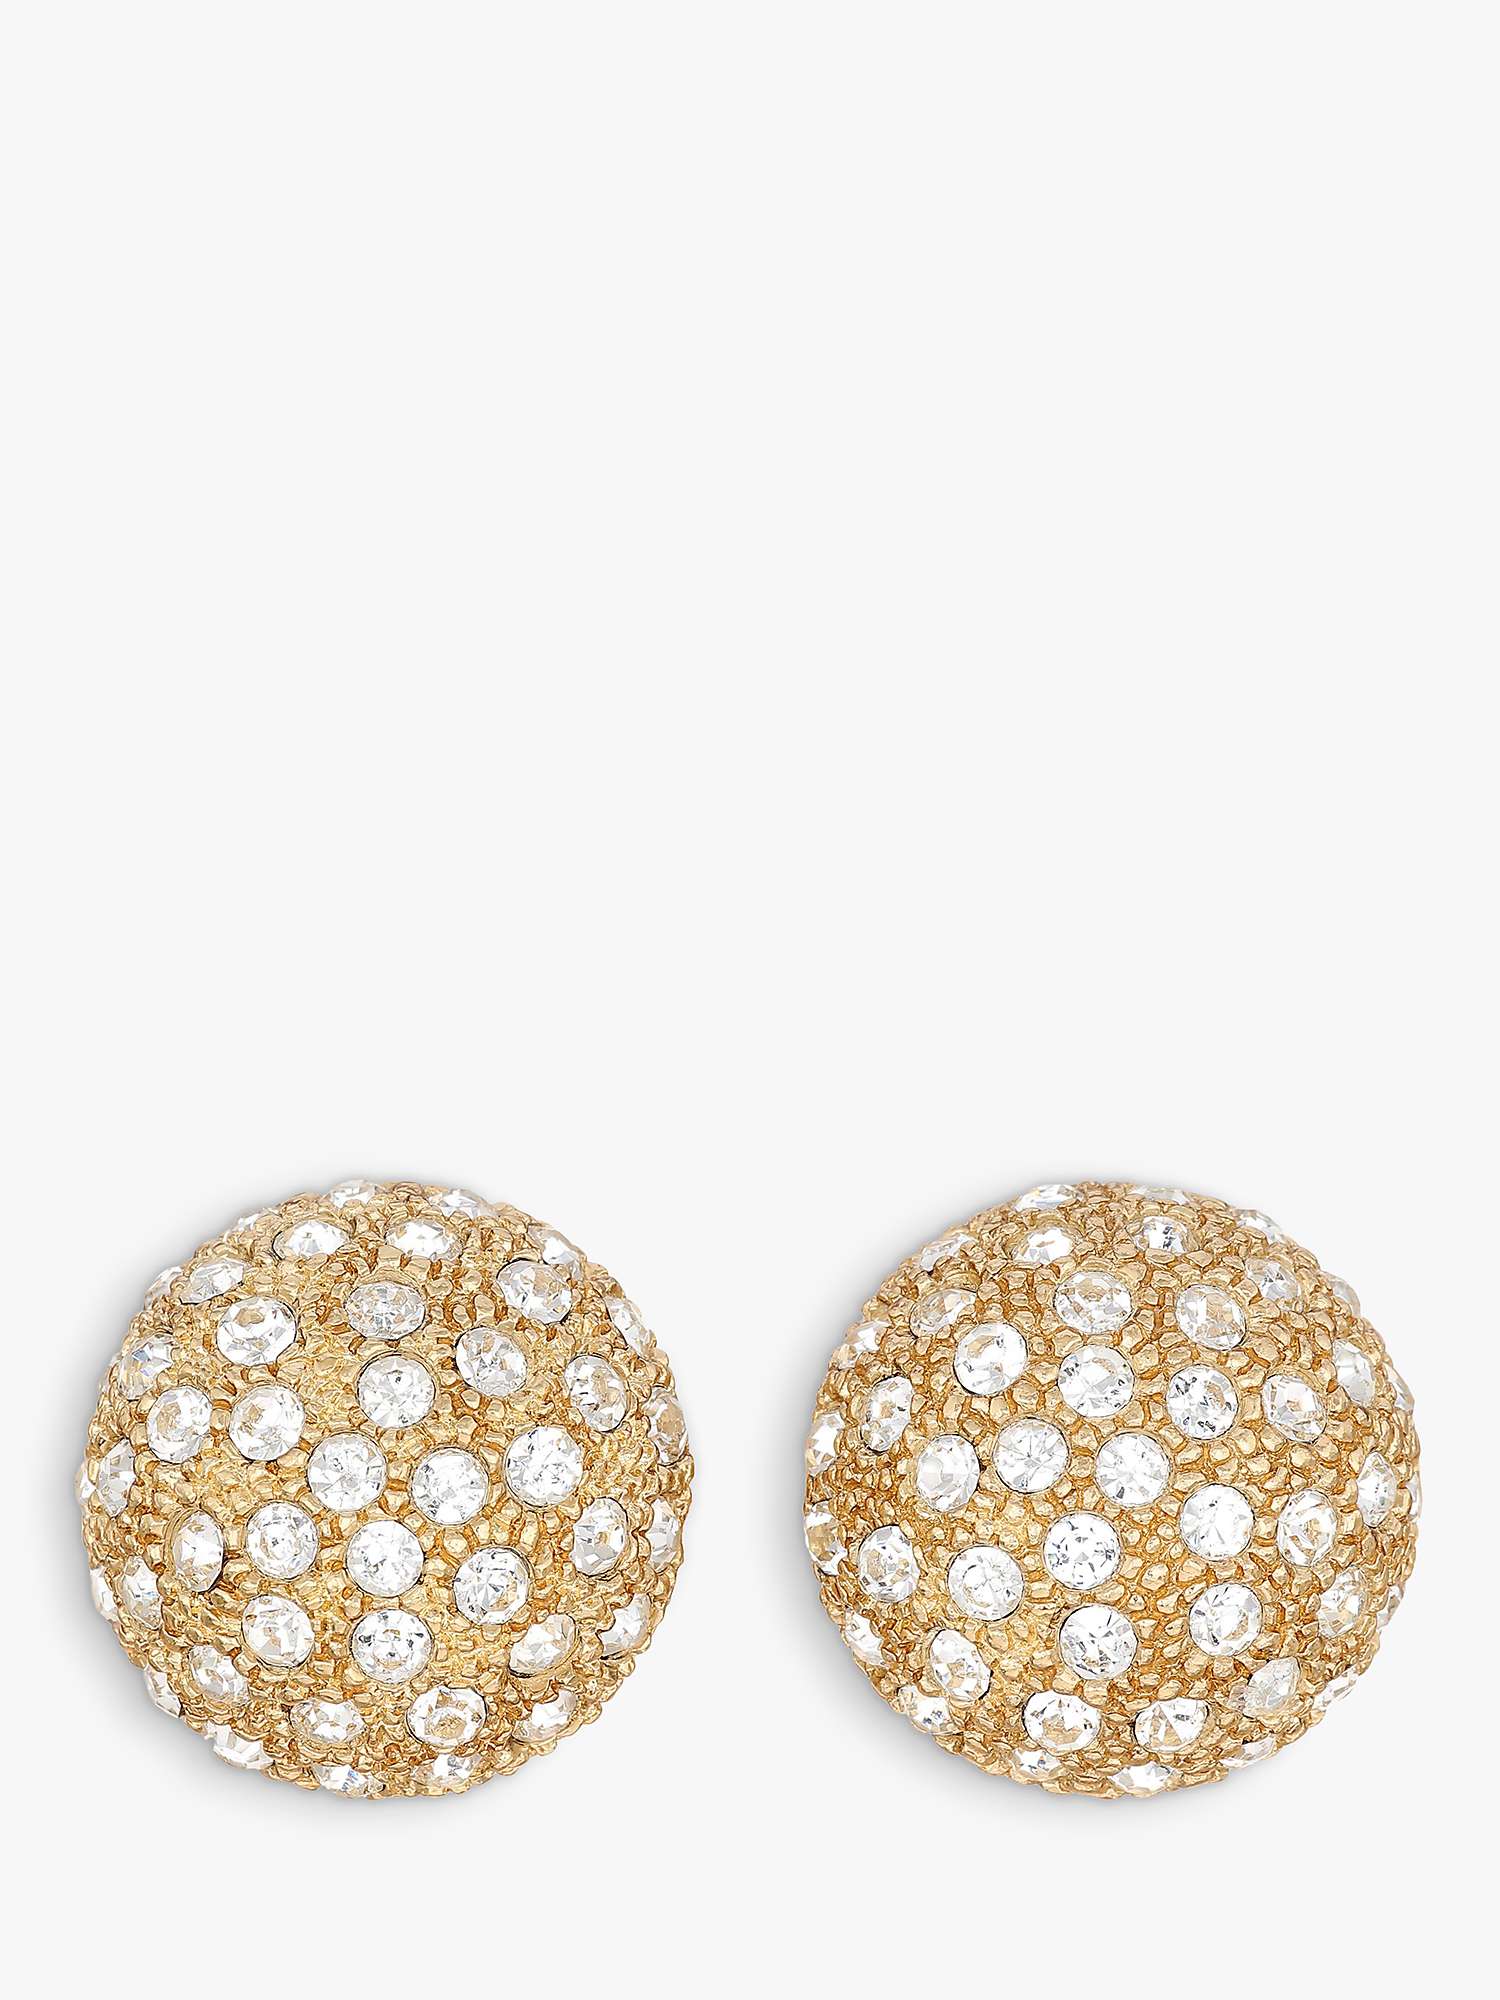 Buy Eclectica Vintage Dome Swarovski Crystal Clip-On Earrings, Dated Circa 1980s Online at johnlewis.com